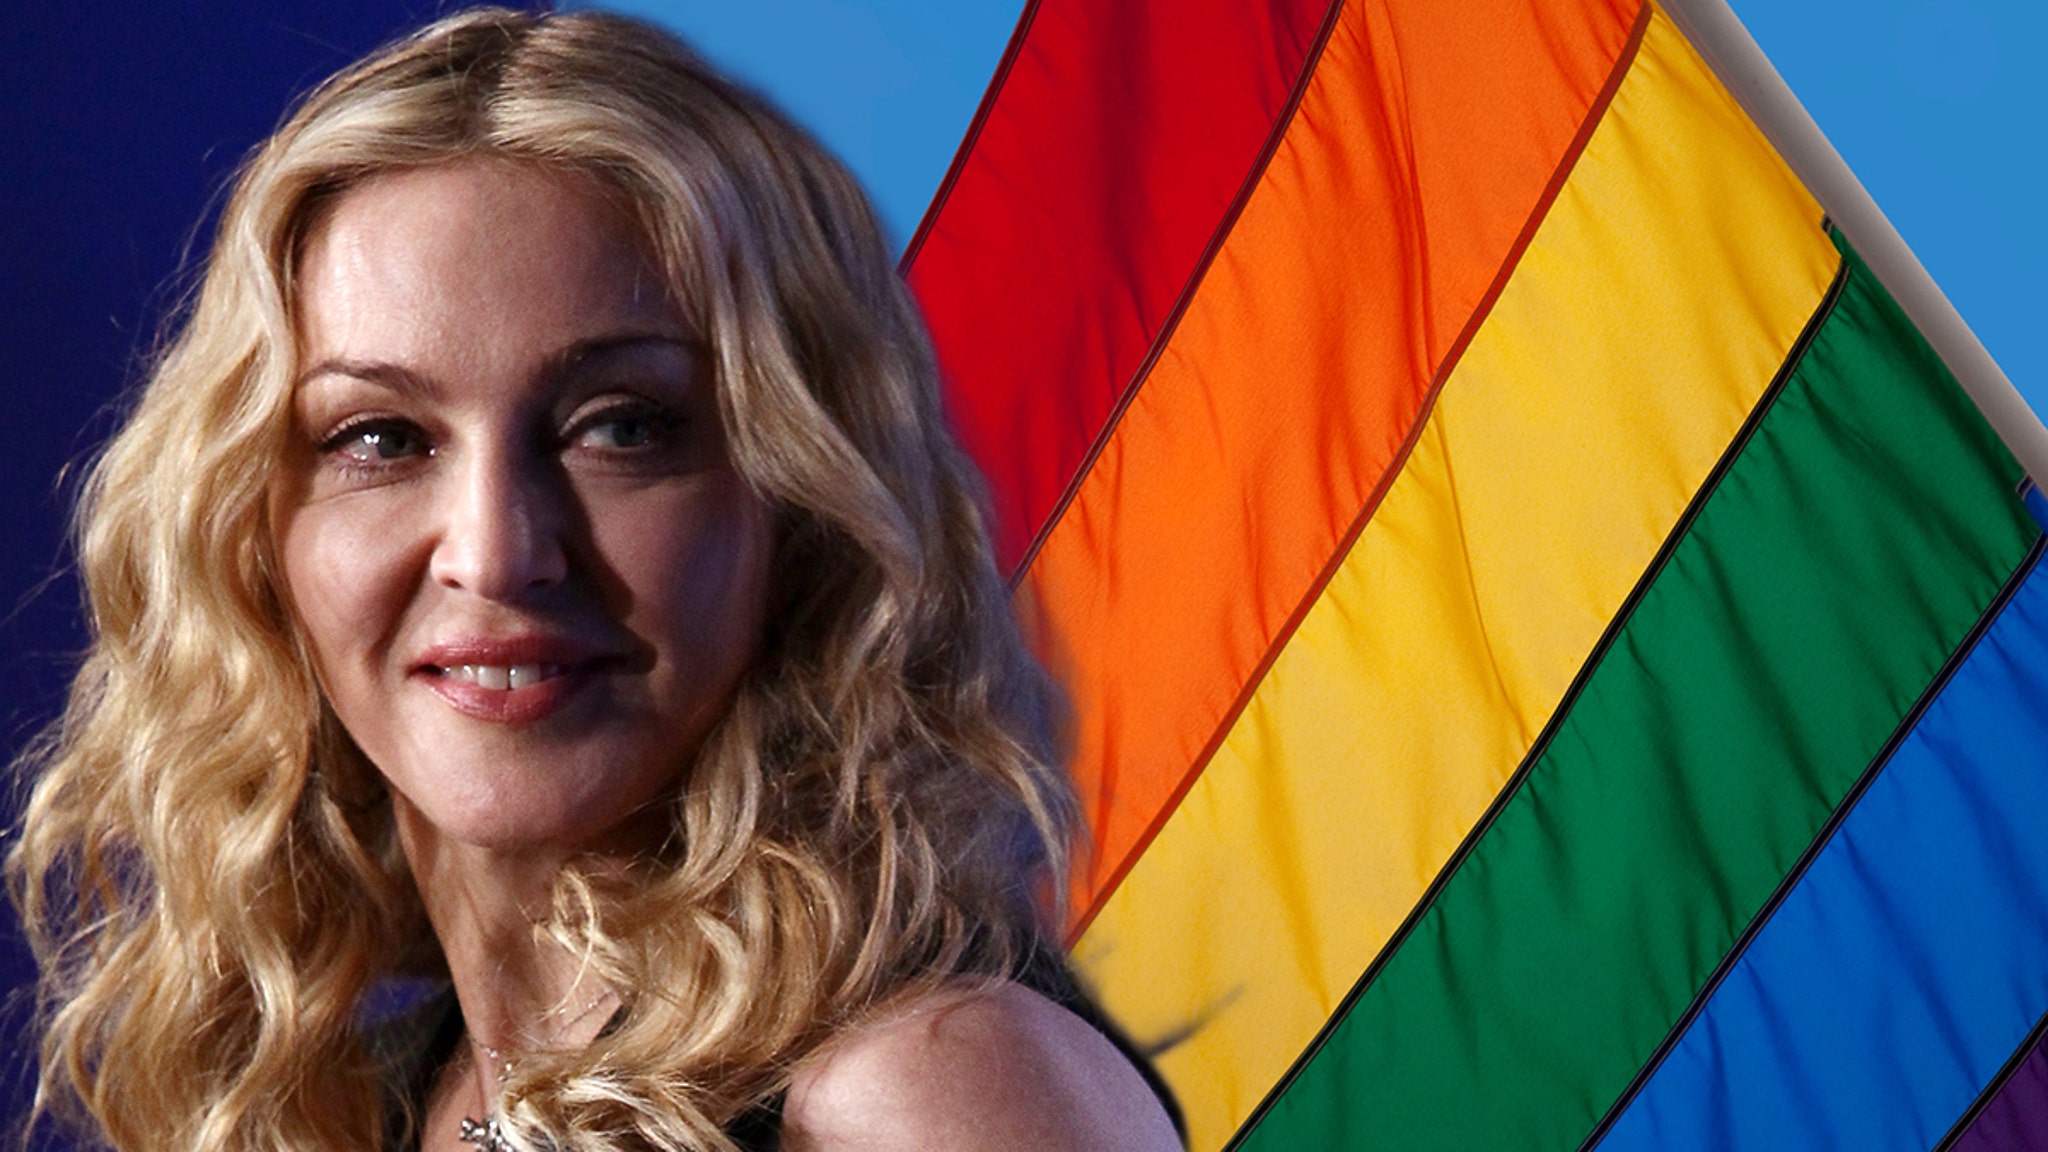 Madonna Seemingly Comes Out as Gay